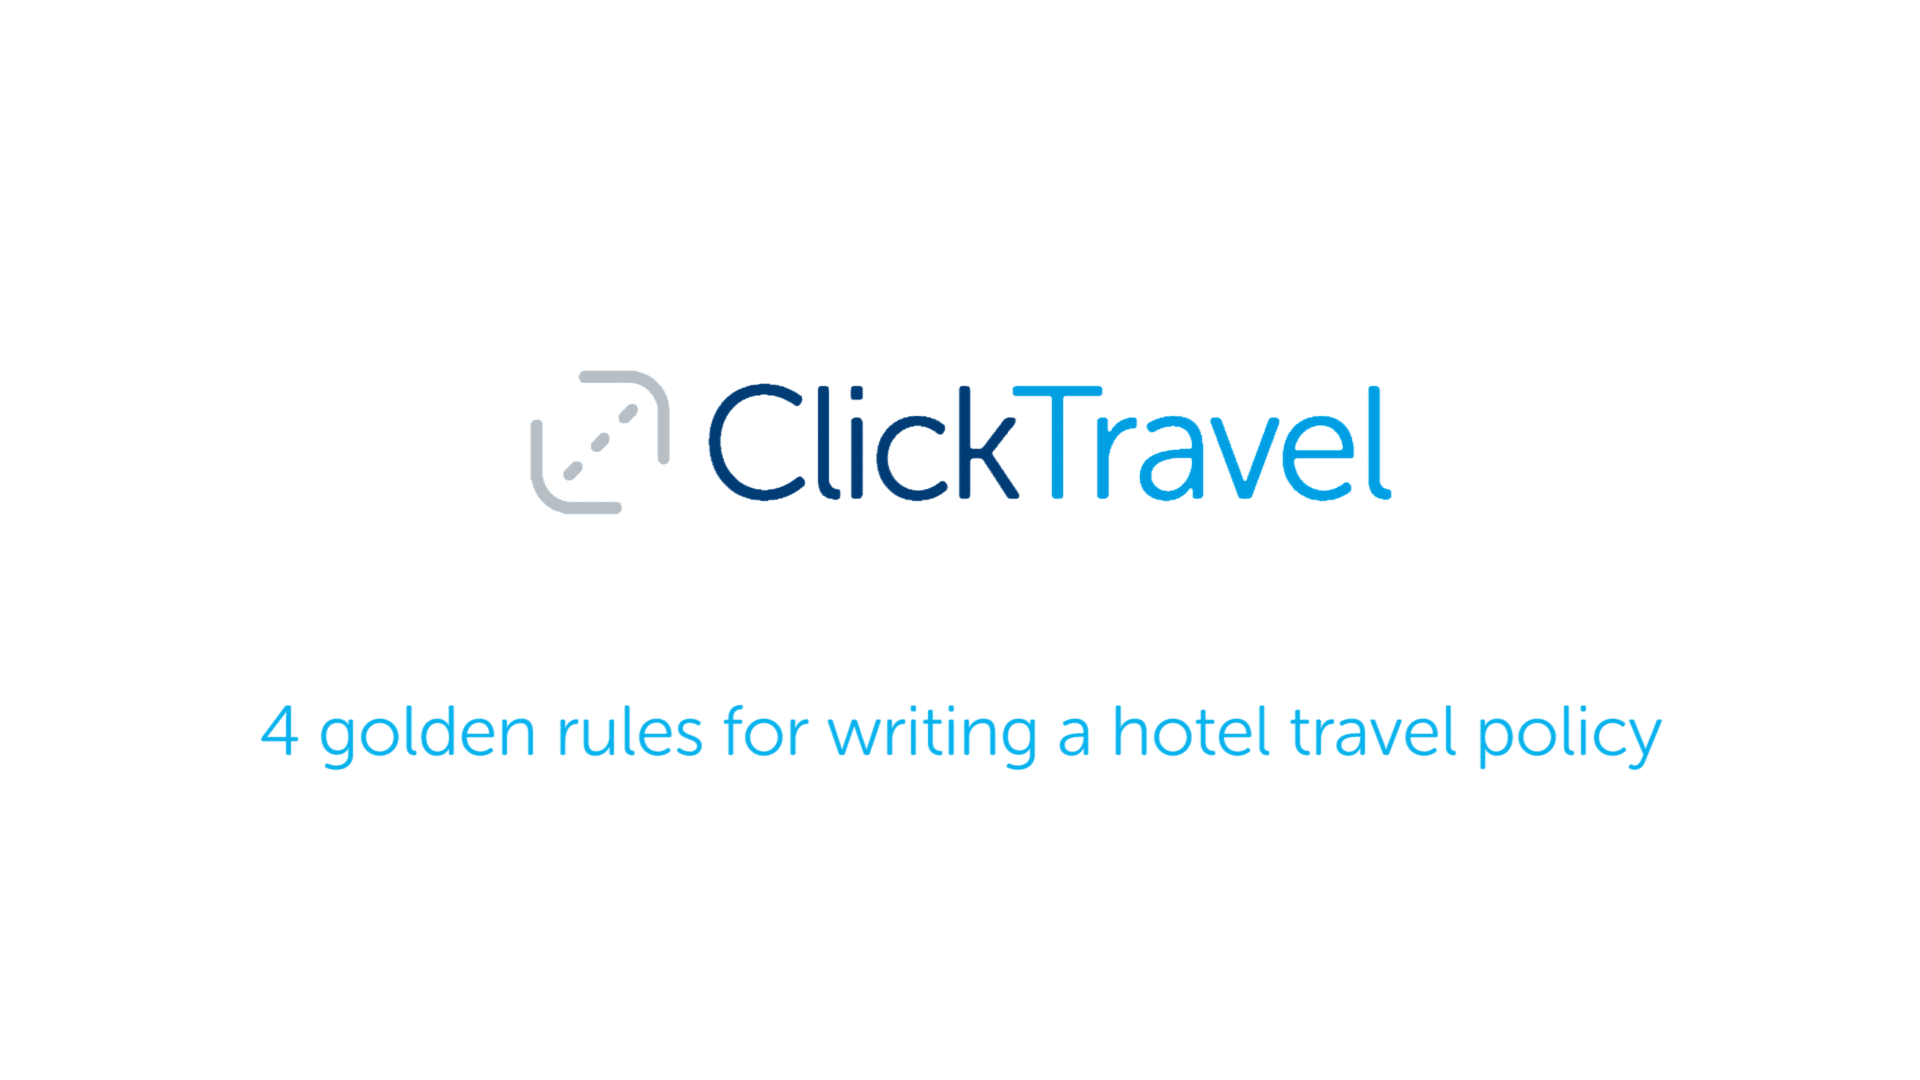 [VIDEO] 4 golden rules for writing a hotel travel policy